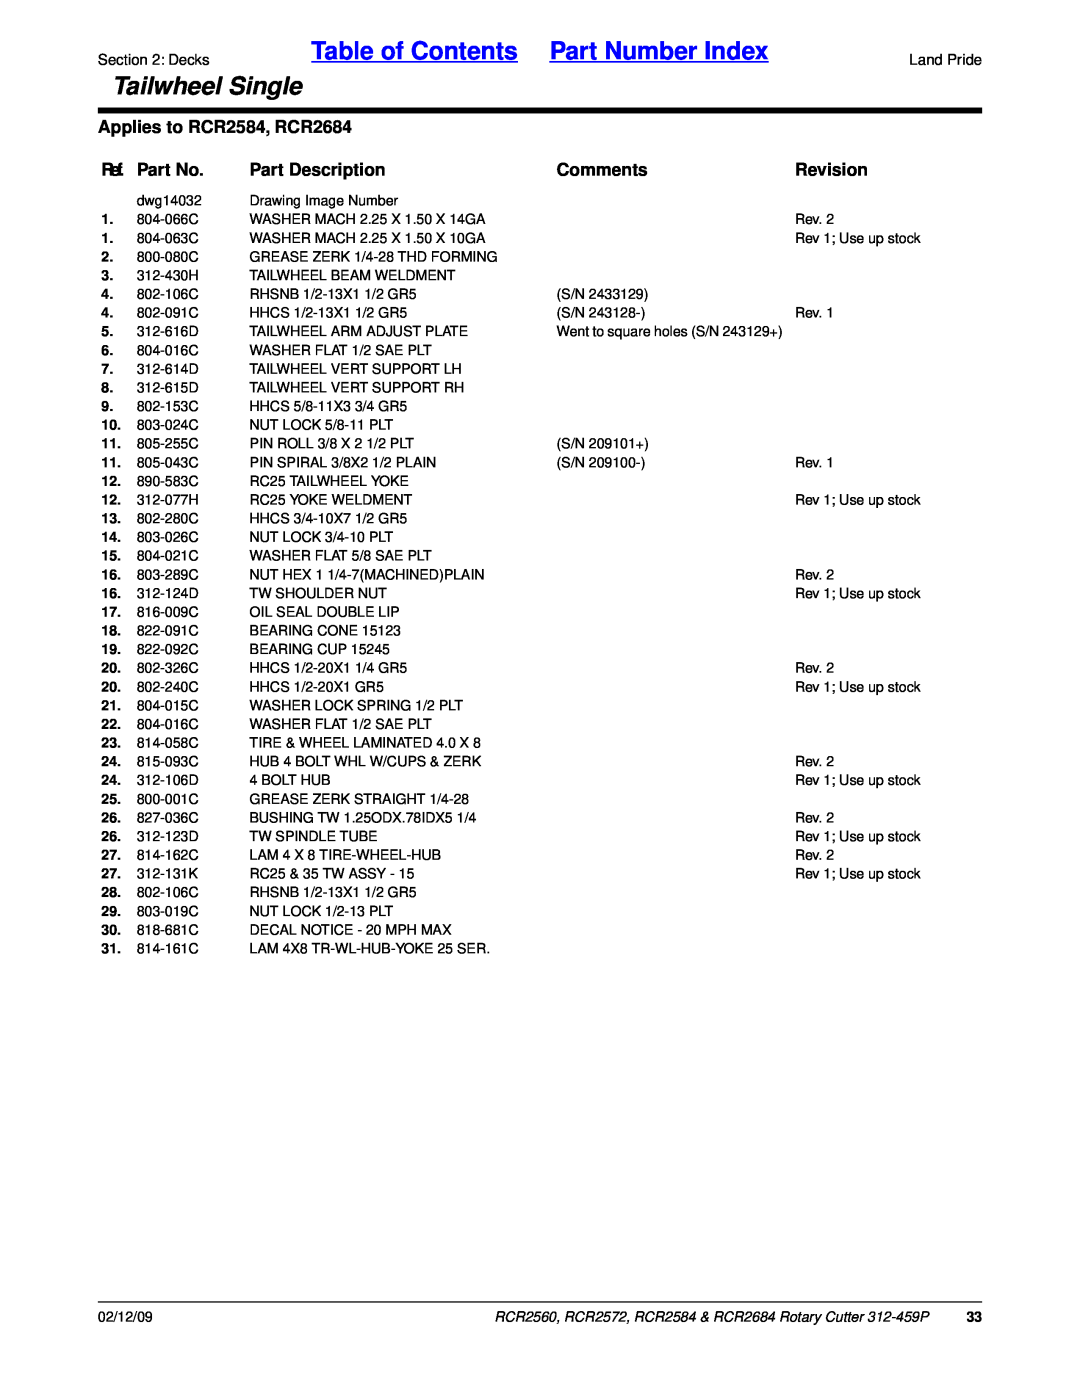 Land Pride Table of Contents Part Number Index, Tailwheel Single, Applies to RCR2584, RCR2684, Ref. Part No, Comments 